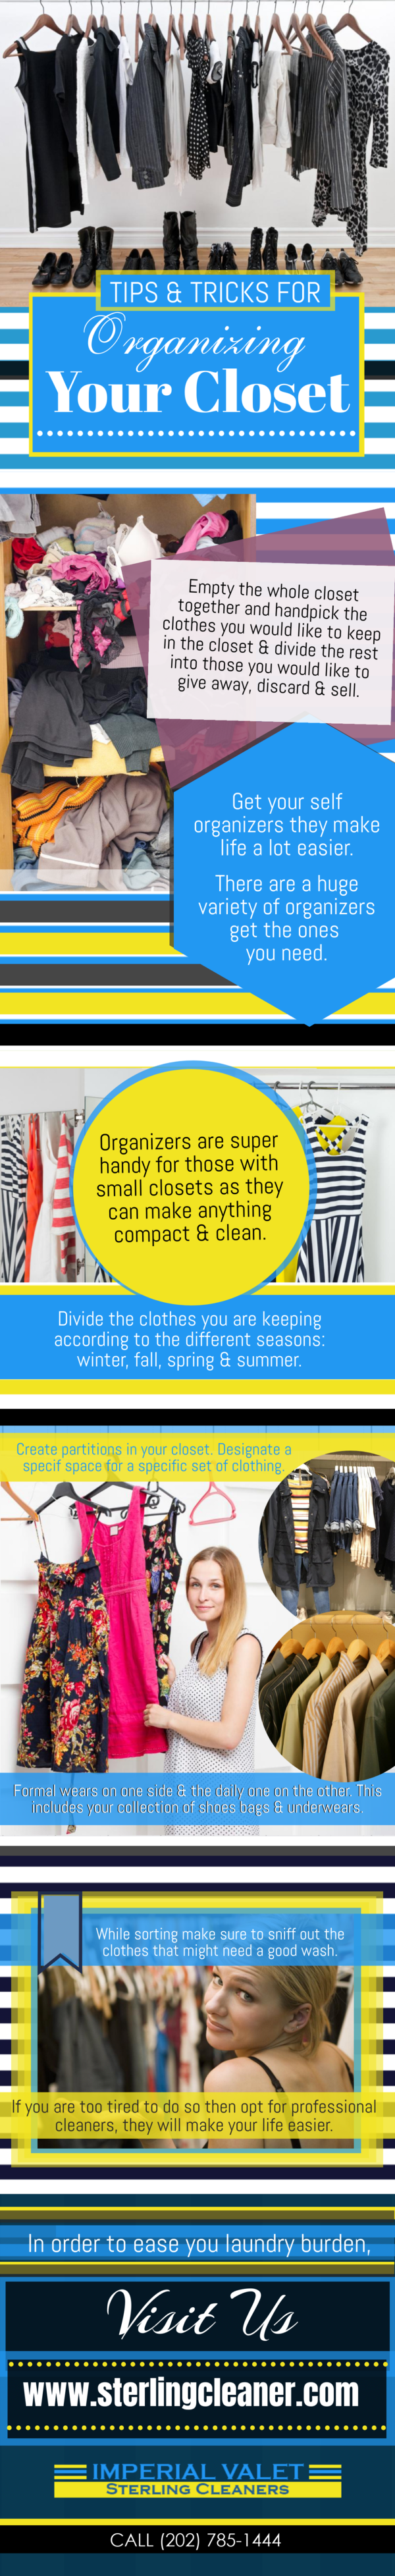 Tips and Tricks_For_Organizing_Your_Closet